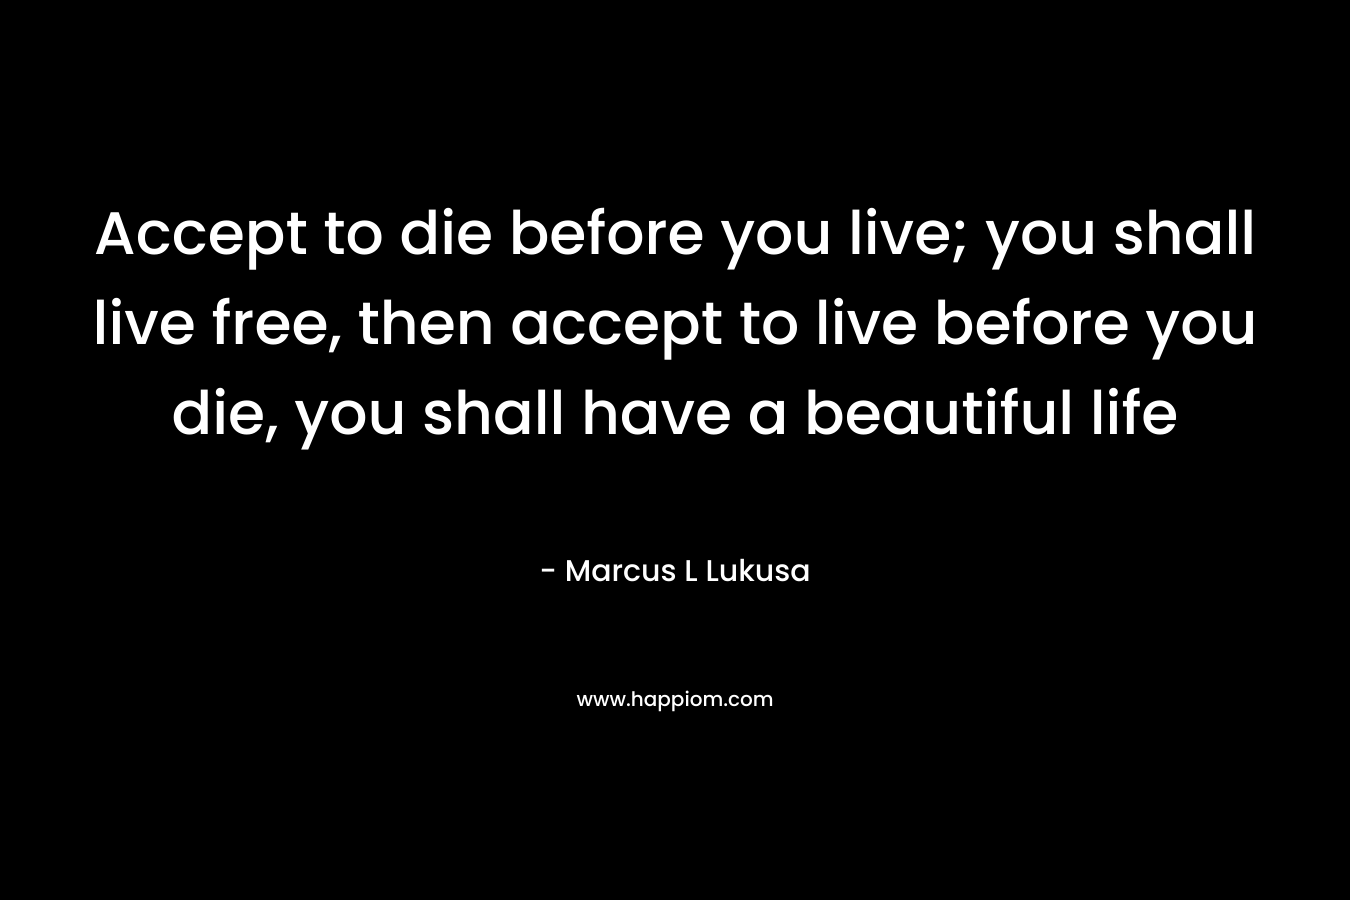 Accept to die before you live; you shall live free, then accept to live before you die, you shall have a beautiful life